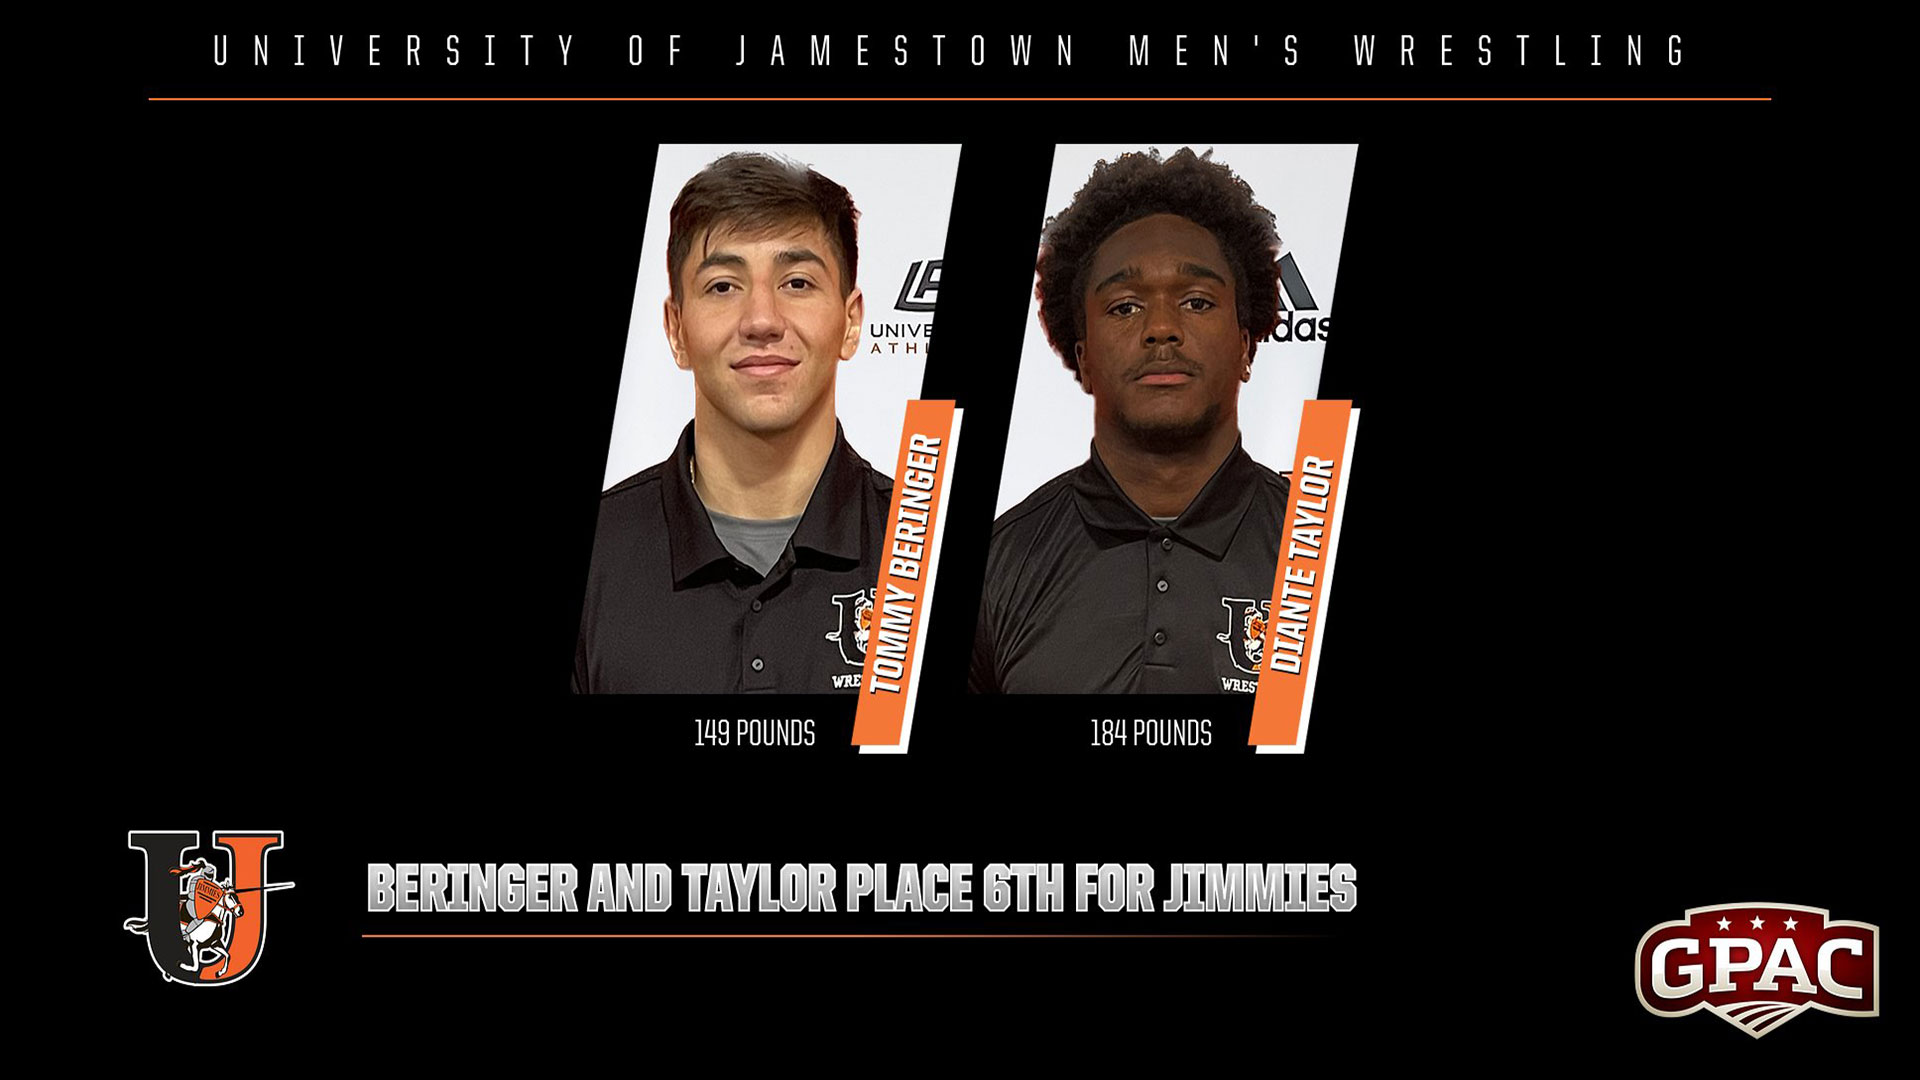 Beringer and Taylor finish 6th for Jimmies at GPAC Championships